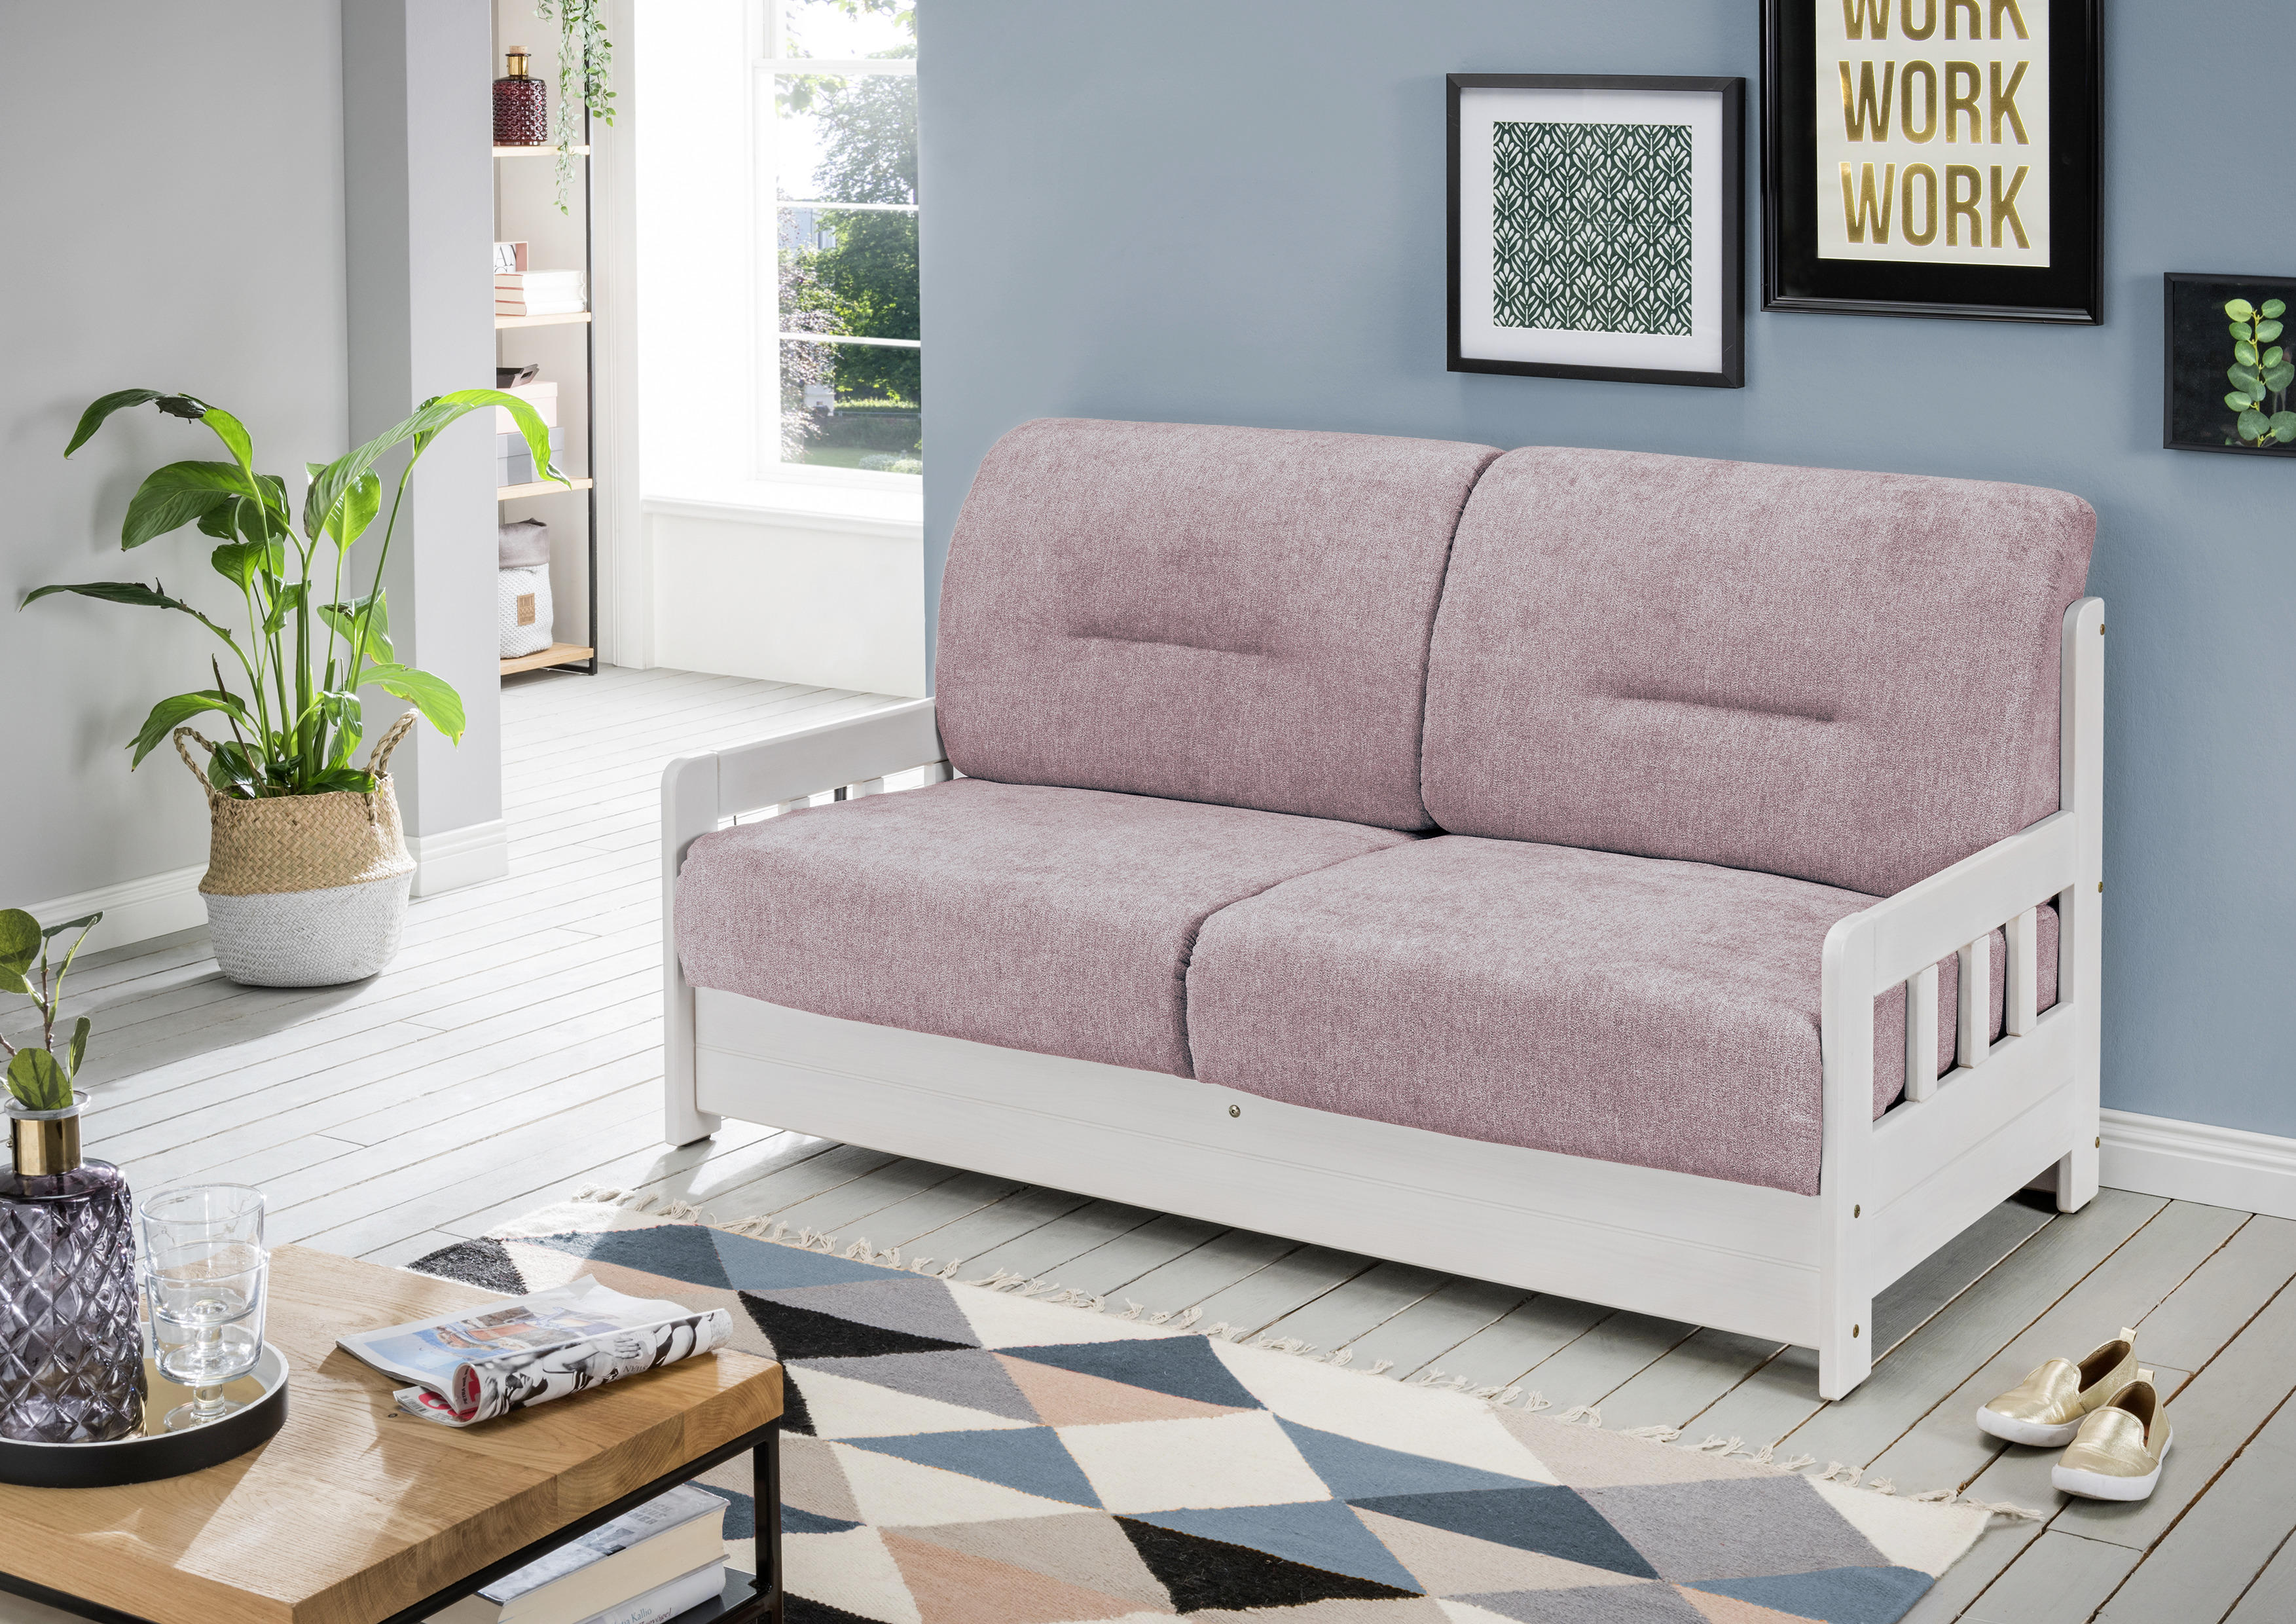 SCHLAFSOFA in Textil Rosa, Weiss  - Weiss/Rosa, Lifestyle, Holz/Textil (154/88/90cm) - Livetastic